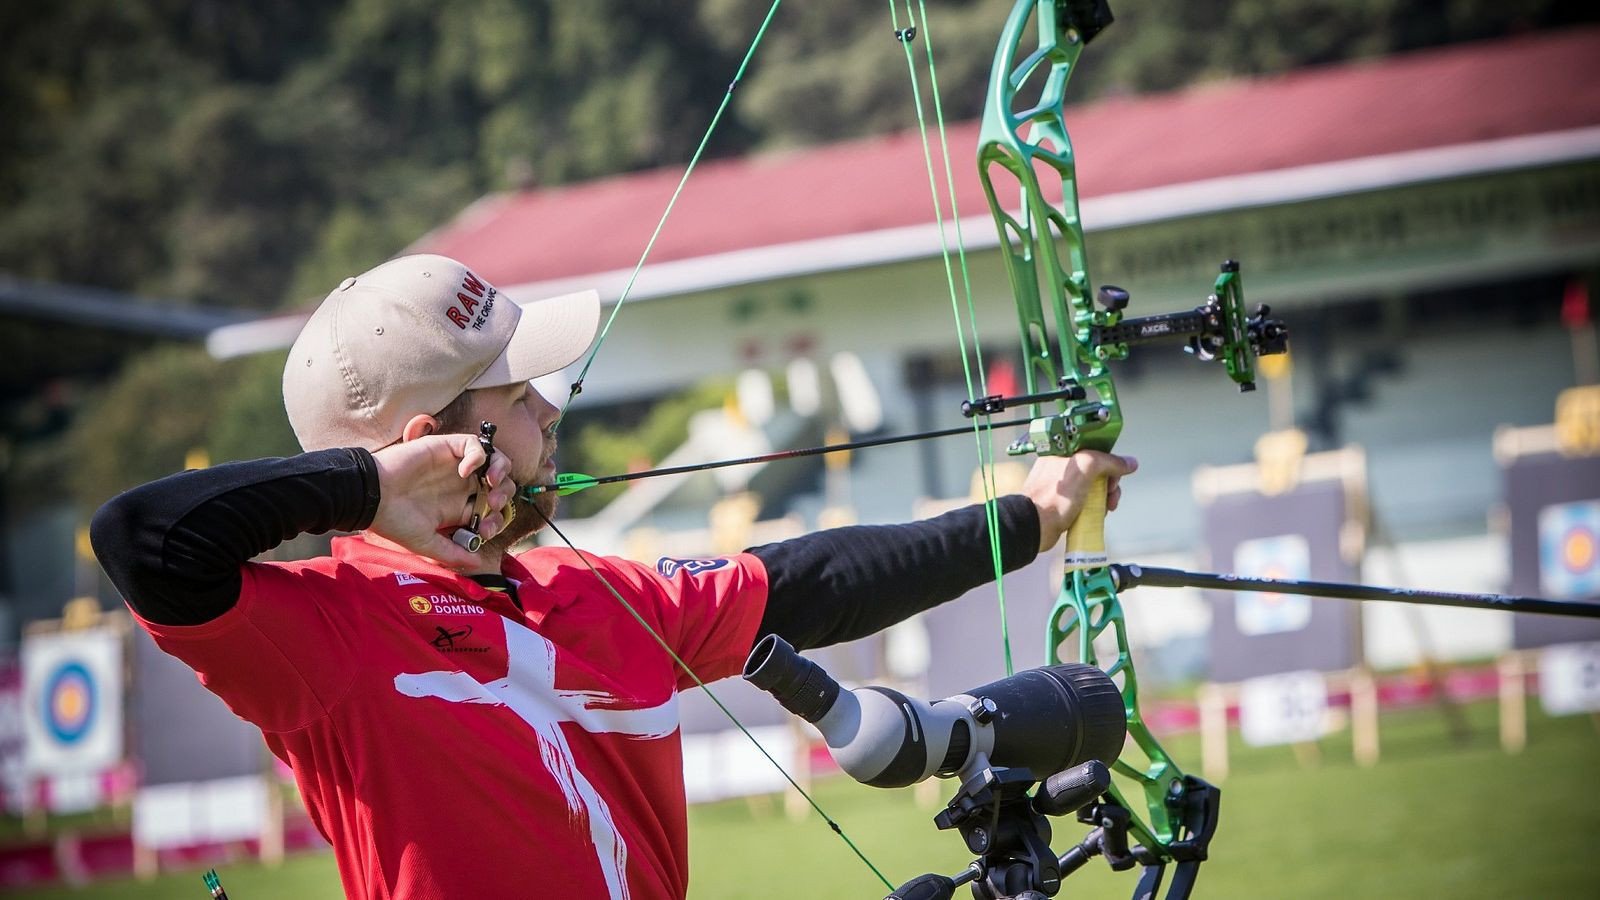 Denmark’s Stephan Hansen will have the opportunity to seal the defence of his men’s compound global crown on Saturday (October 21) ©World Archery